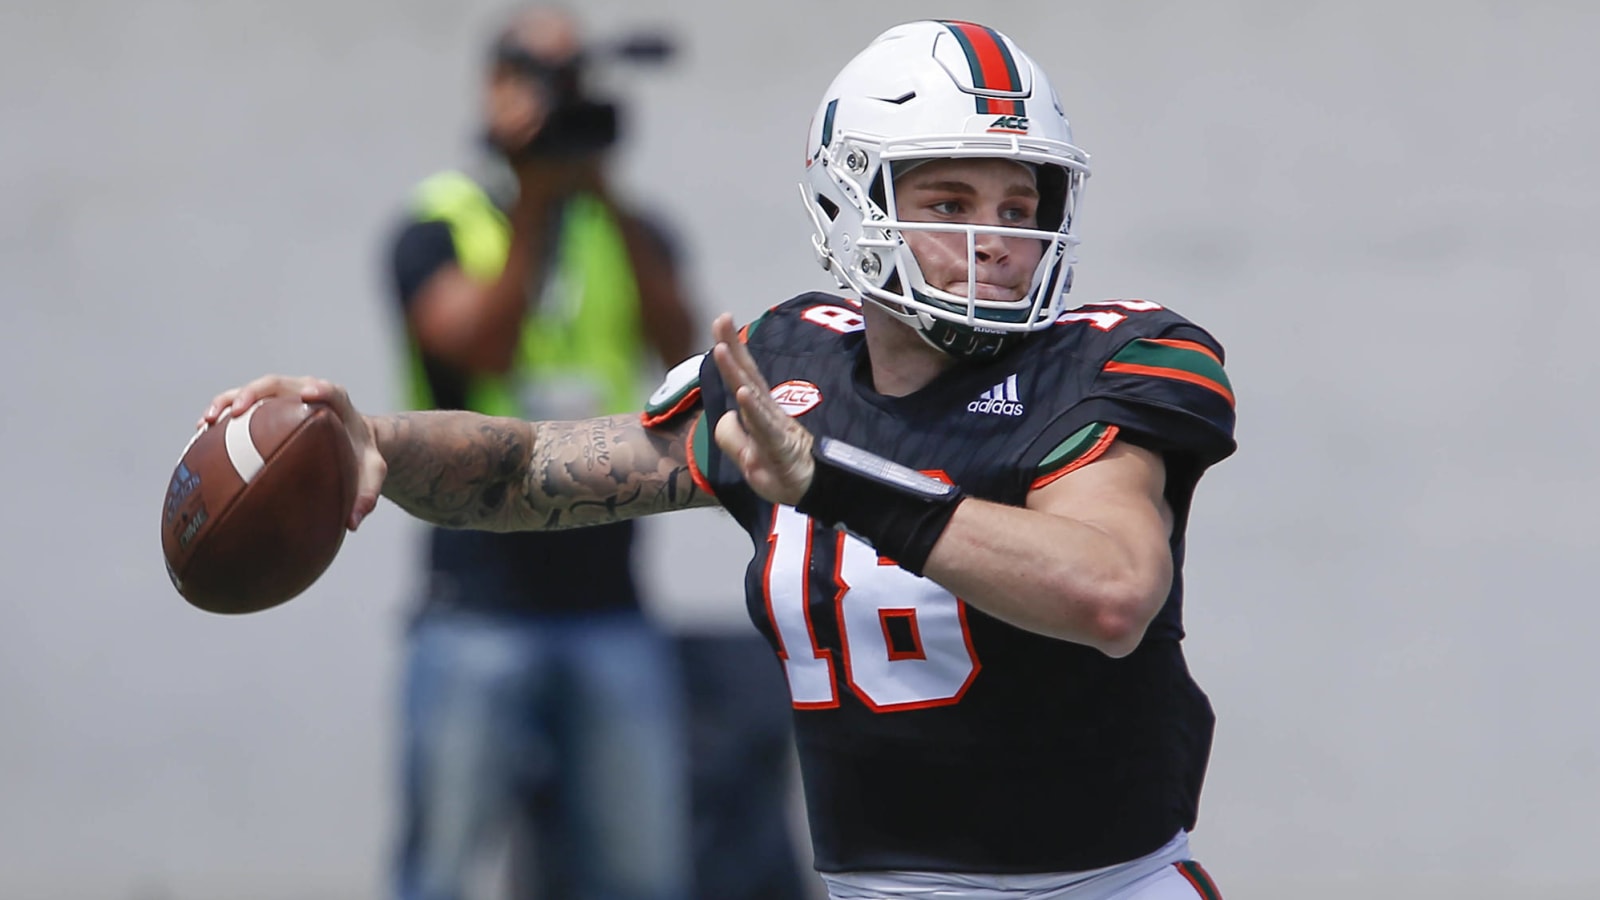 Tate Martell not even listed on UNLV depth chart